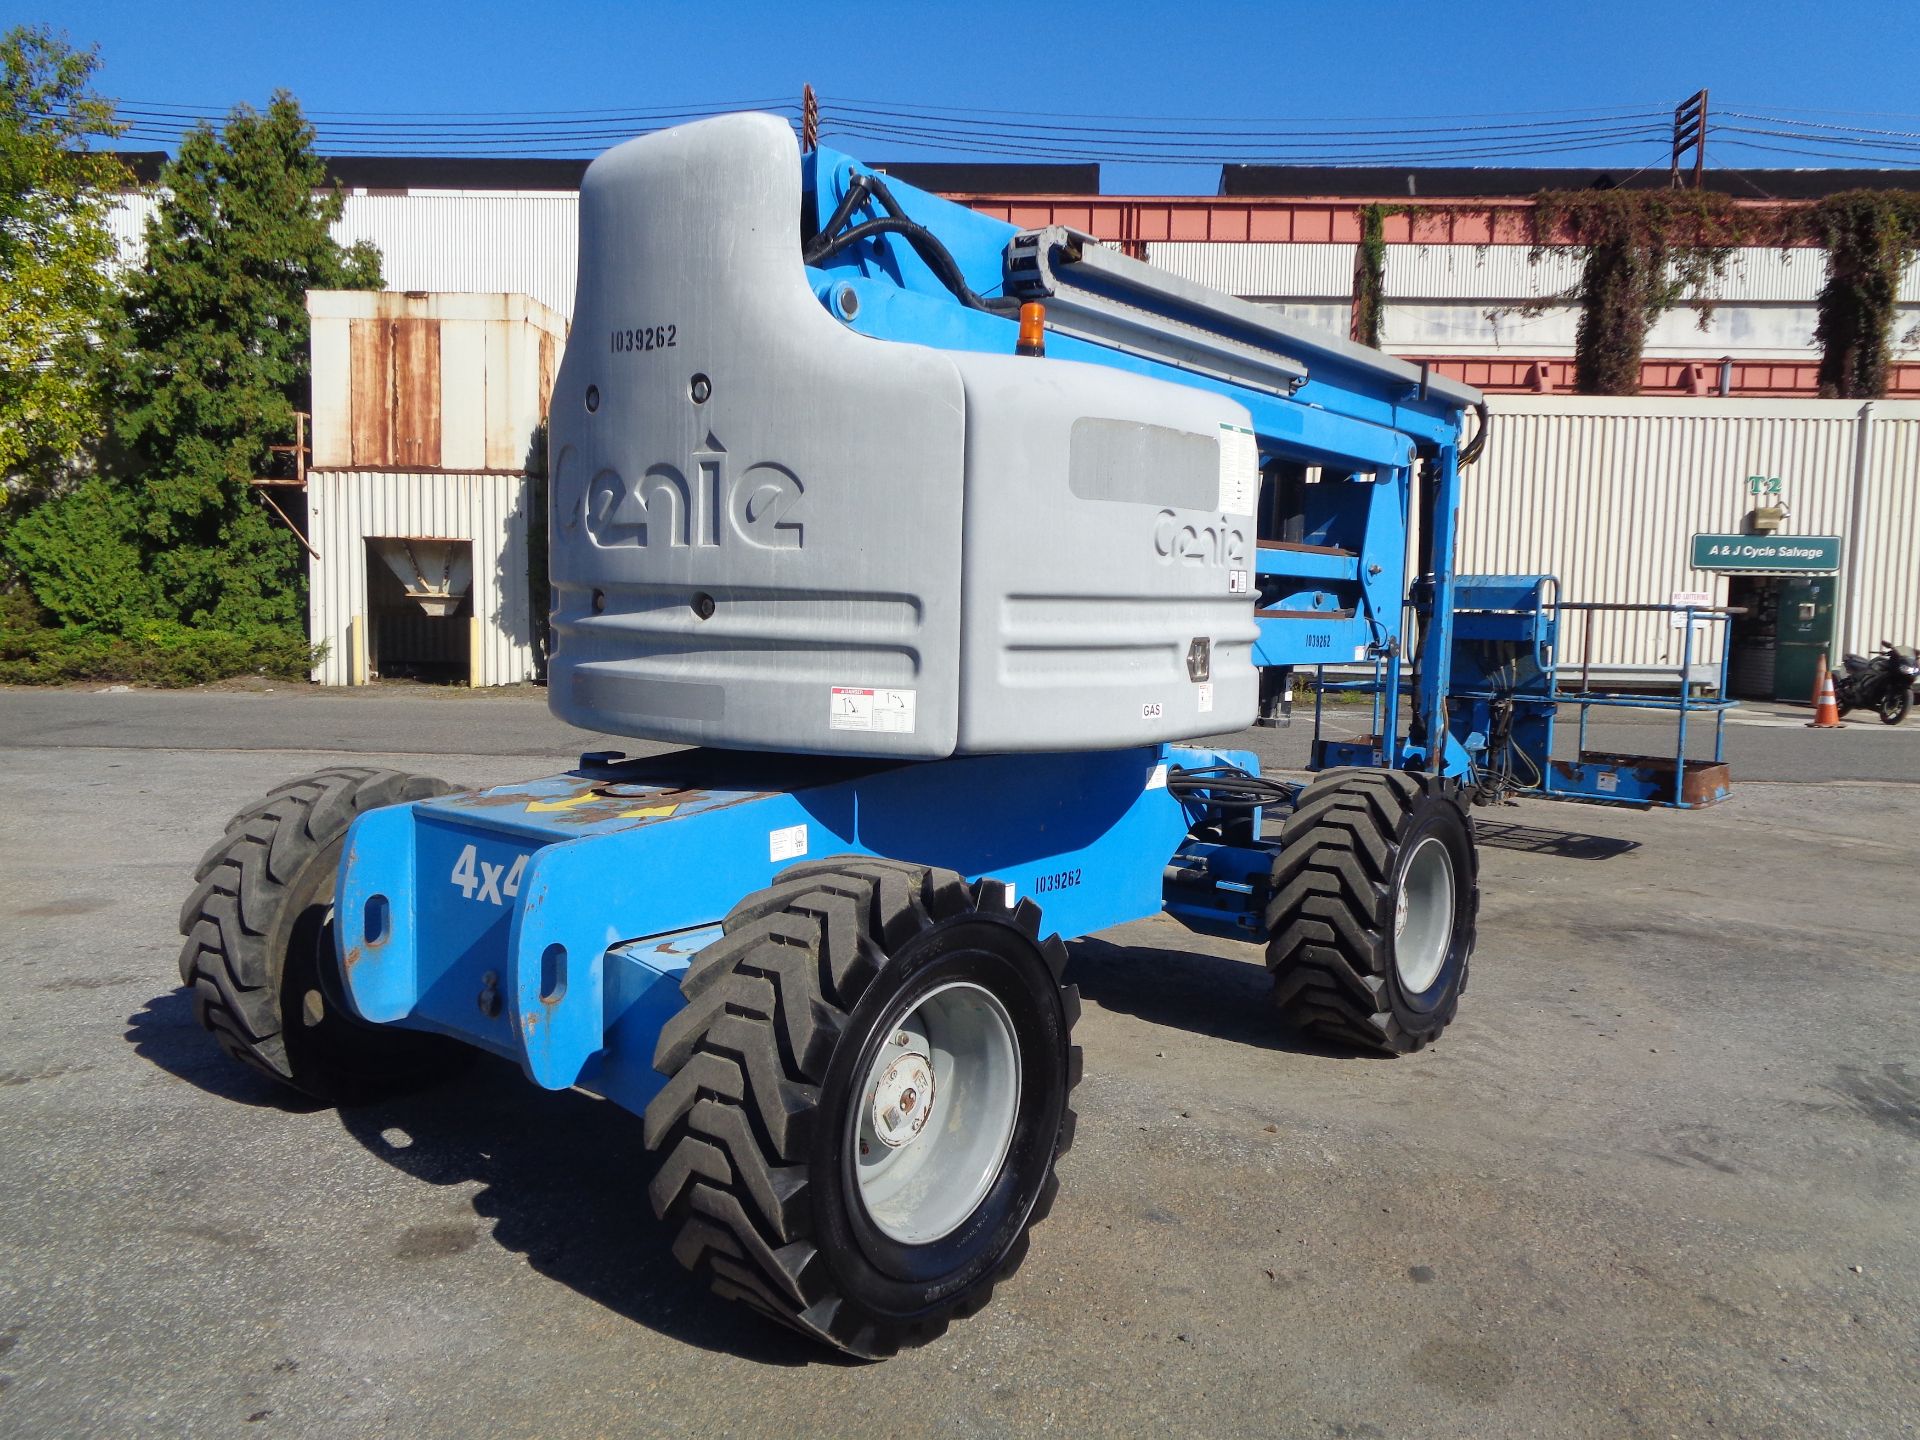 2008 Genie Z60 34 Articulating Boom Man Aerial Lift - Image 6 of 20